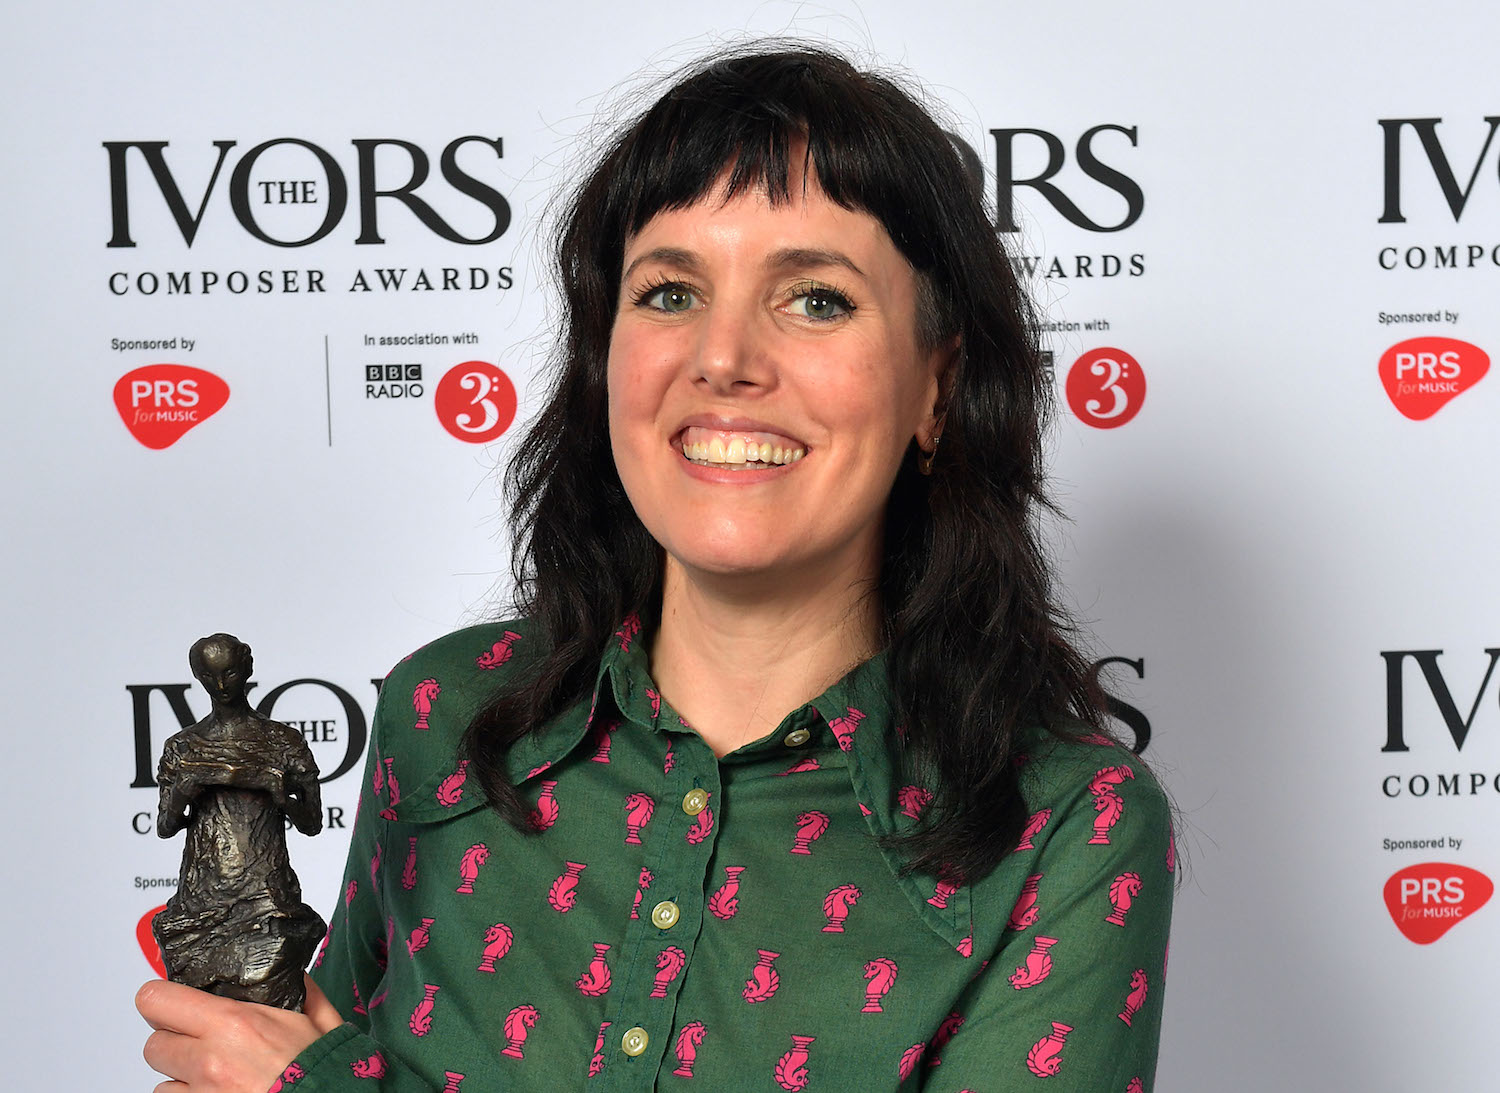 Winners Announced for the Ivors Composer Awards 2019